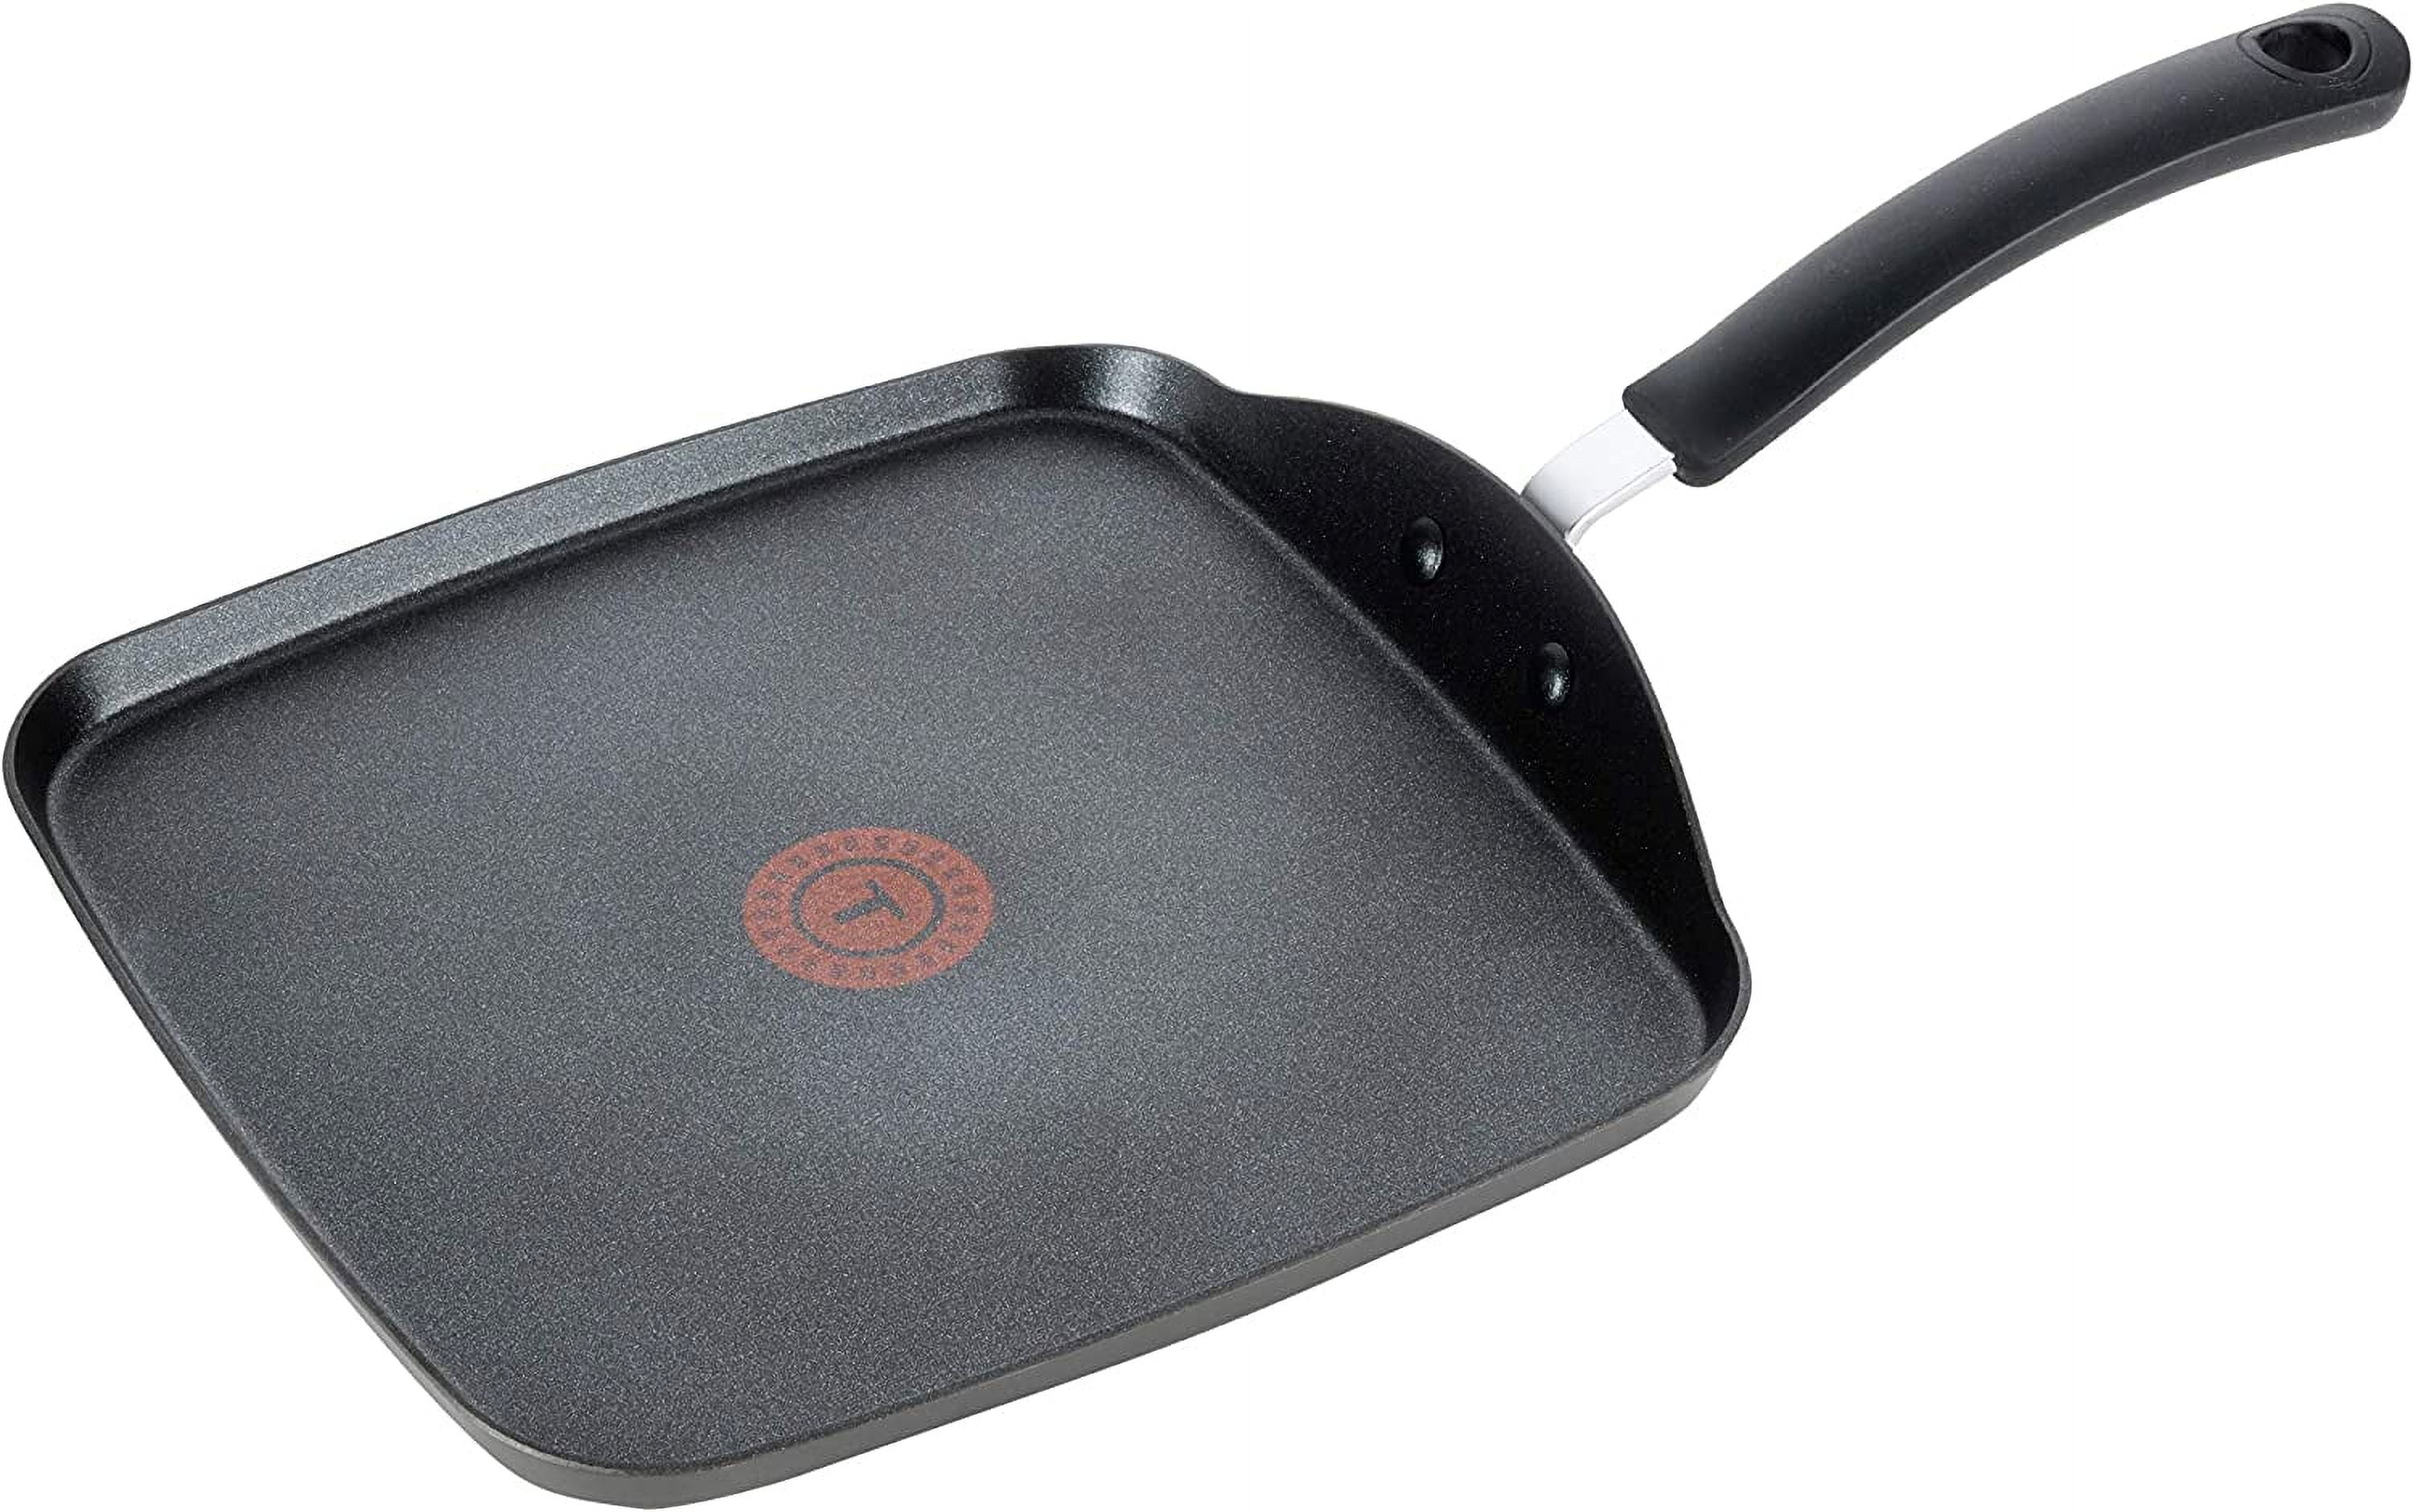 LECOOKING 10 Inch Square Griddle Pan, Nonstick Grill Pan for Cooking Eggs,  Omelettes, and More, Griddle Cookware, PFOA Free